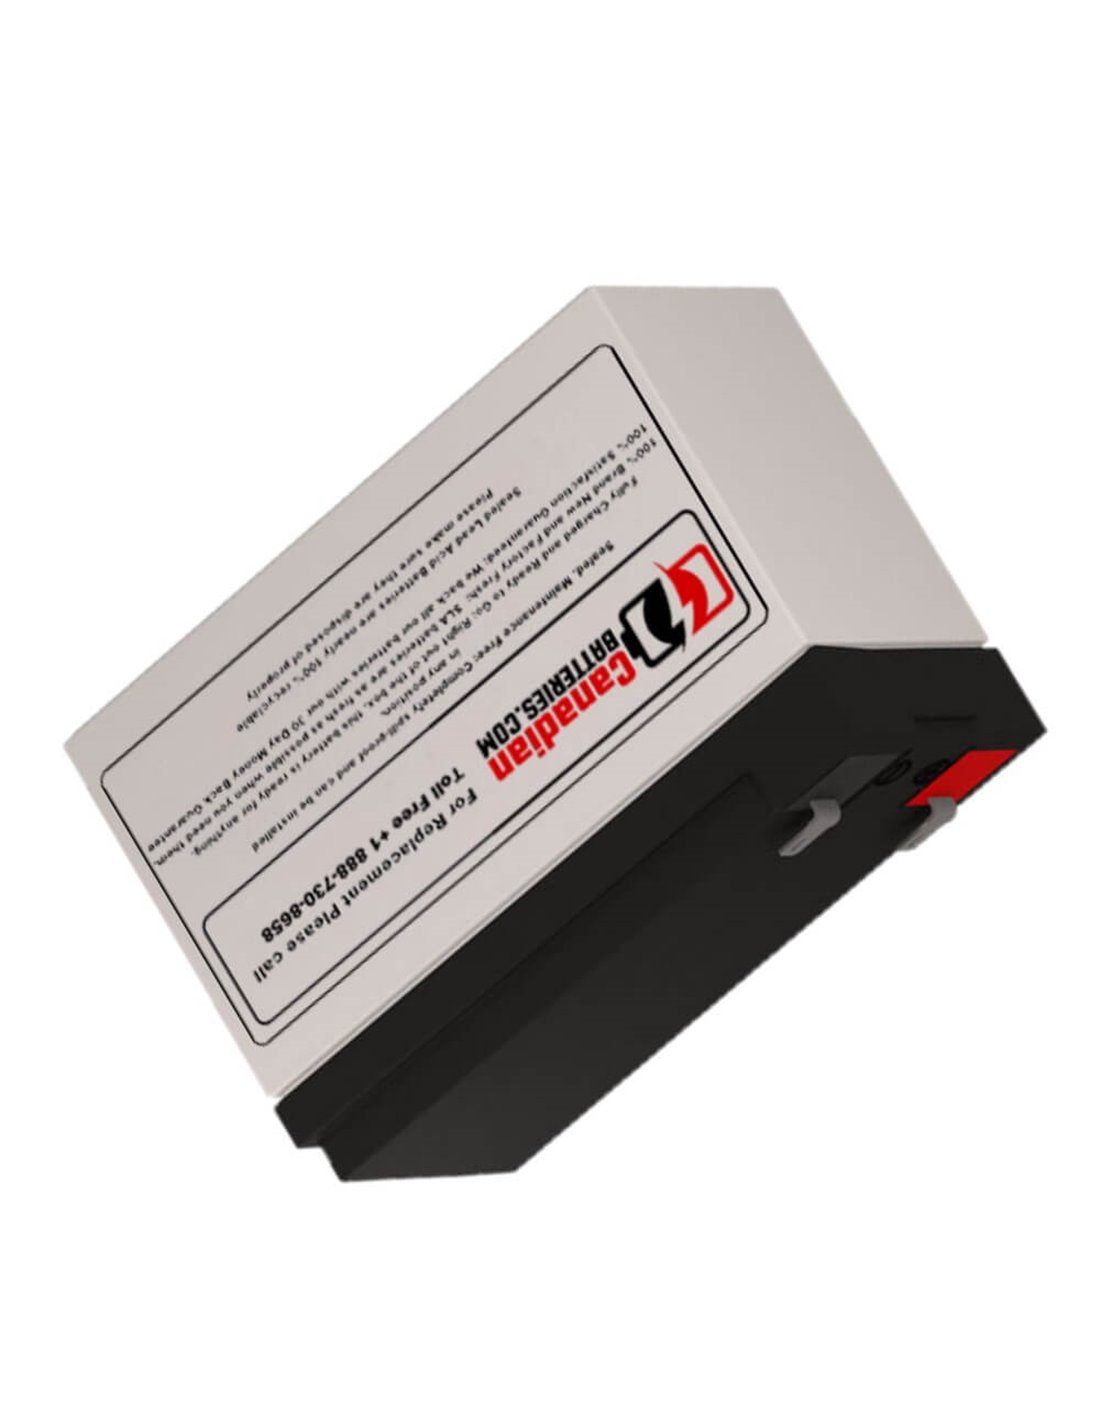 Battery for Oneac One404ag-se UPS, 1 x 12V, 9Ah - 108Wh